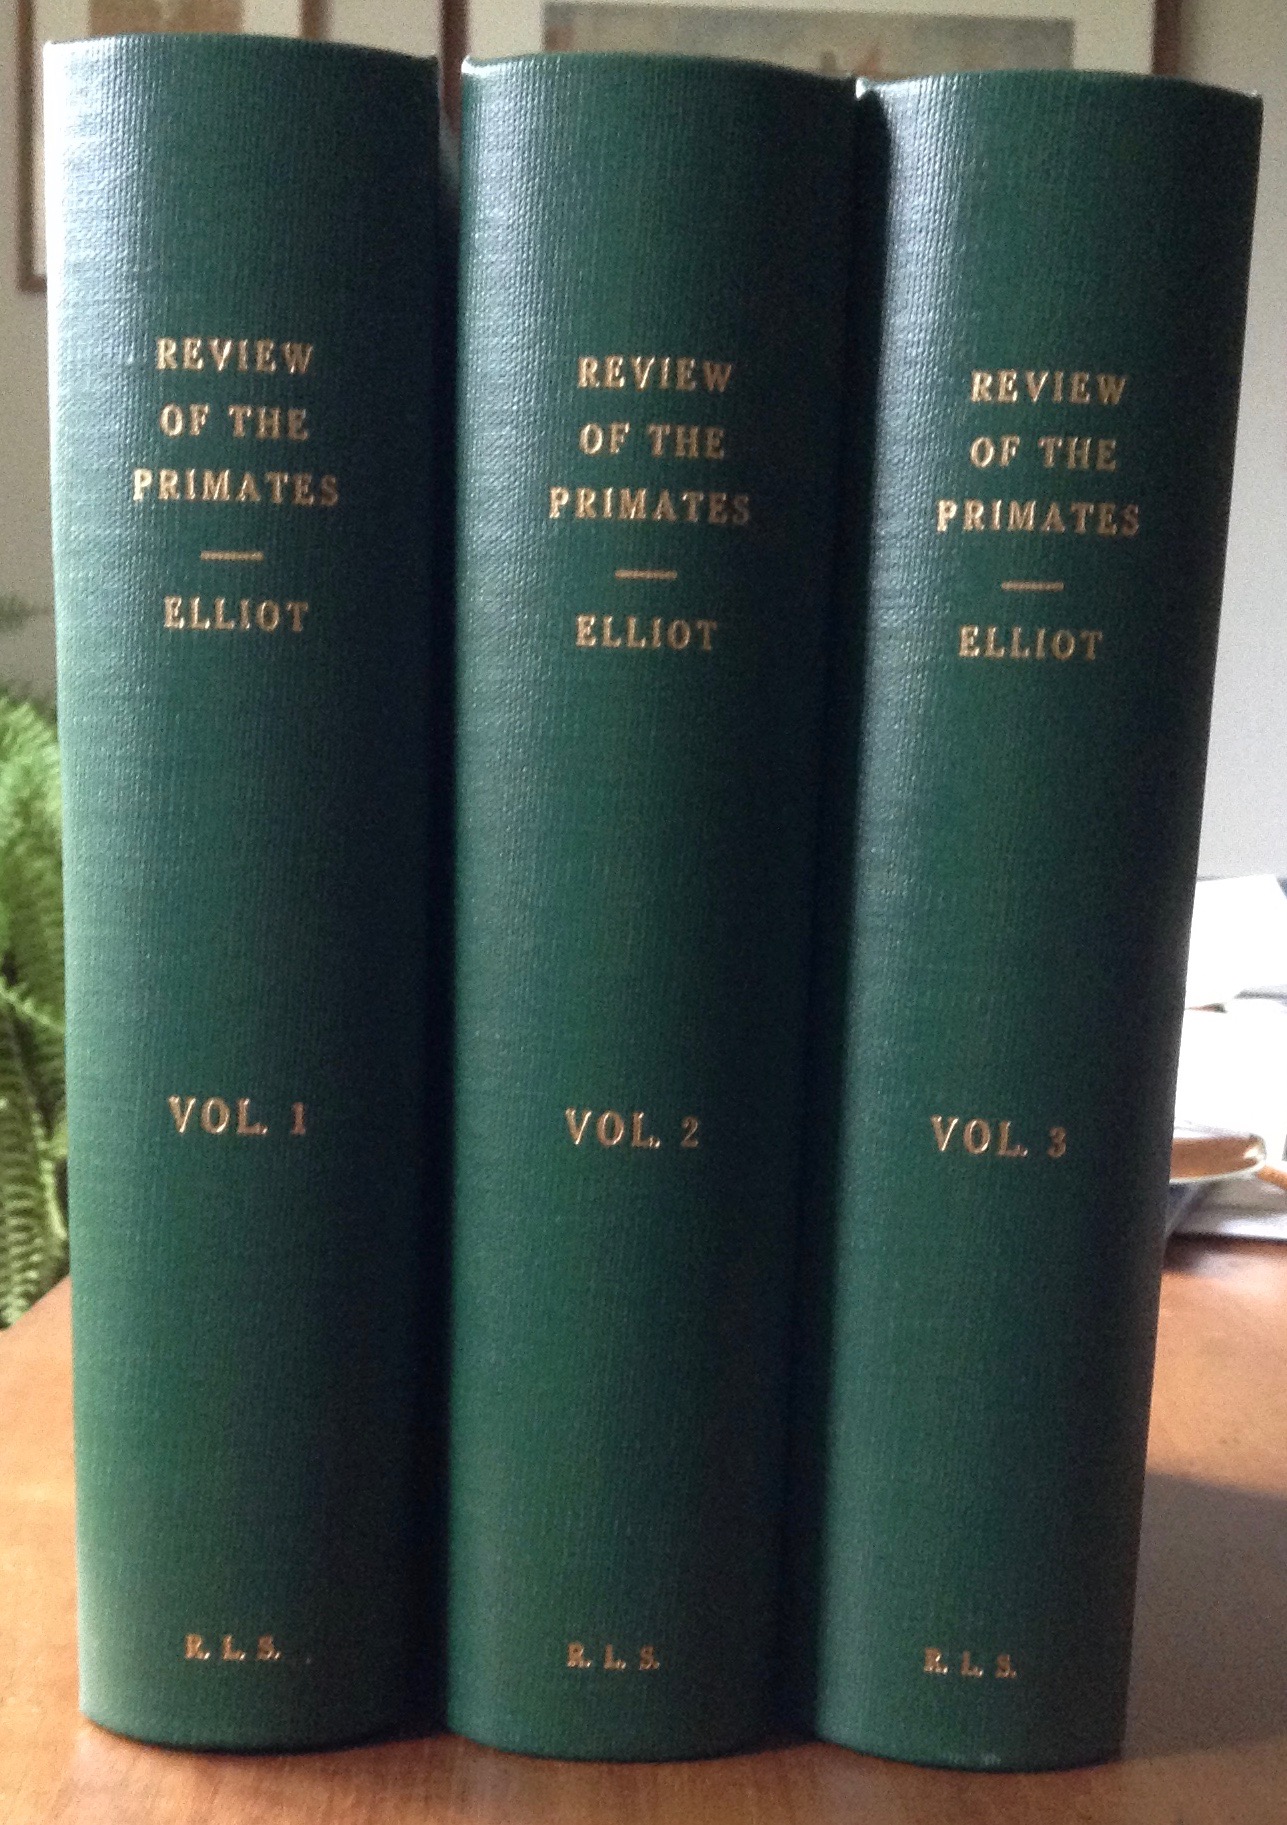 A Review of the Primates. 3 Volumes. 